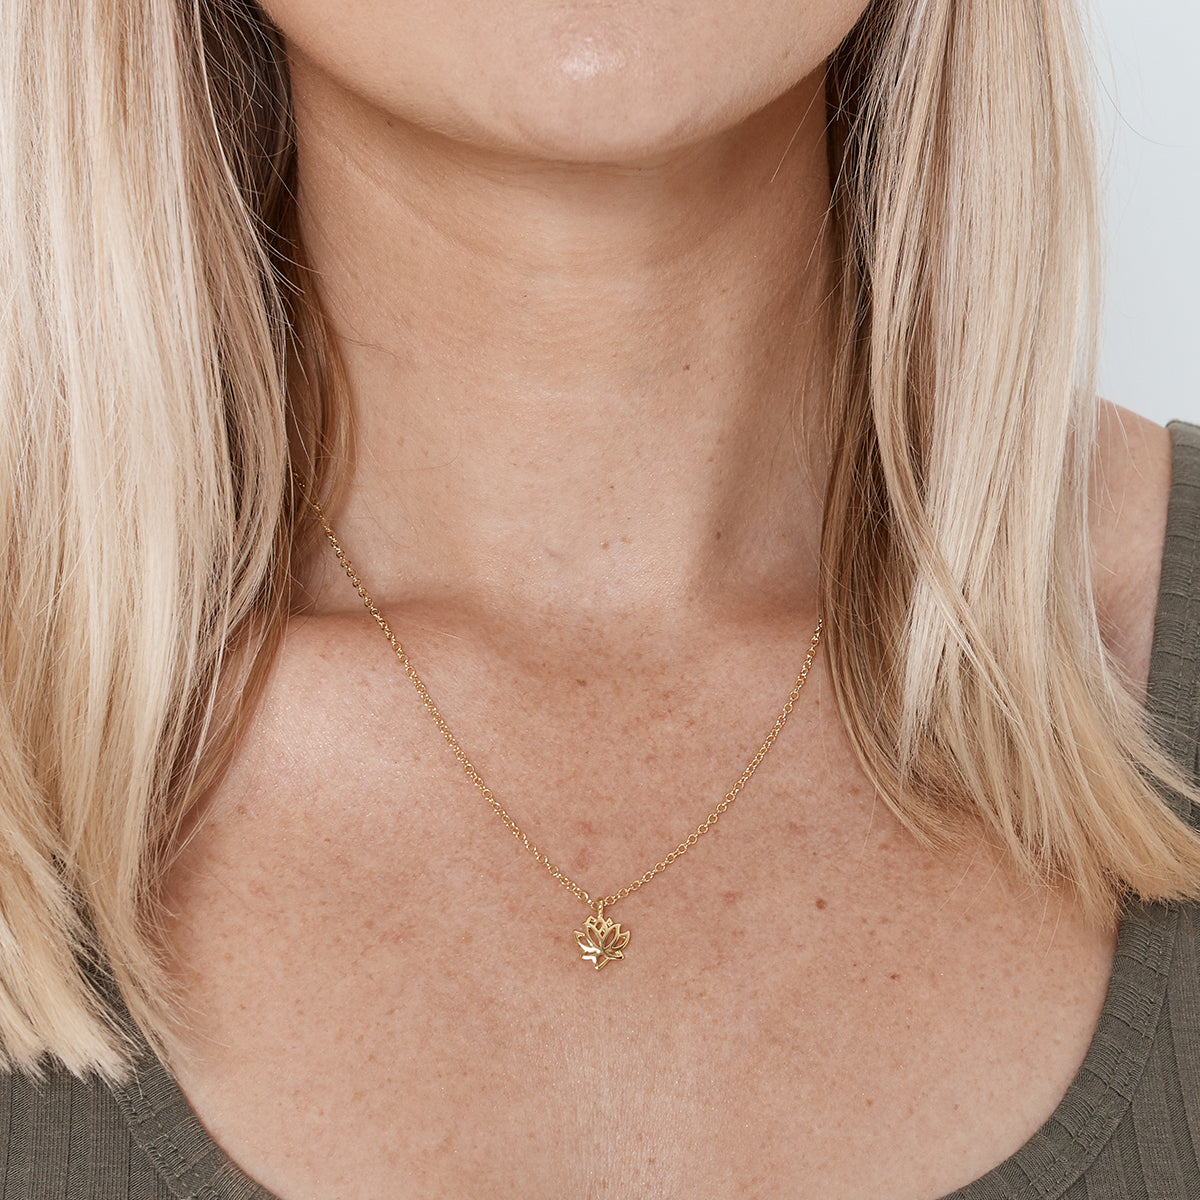 Recovery Lotus Necklace